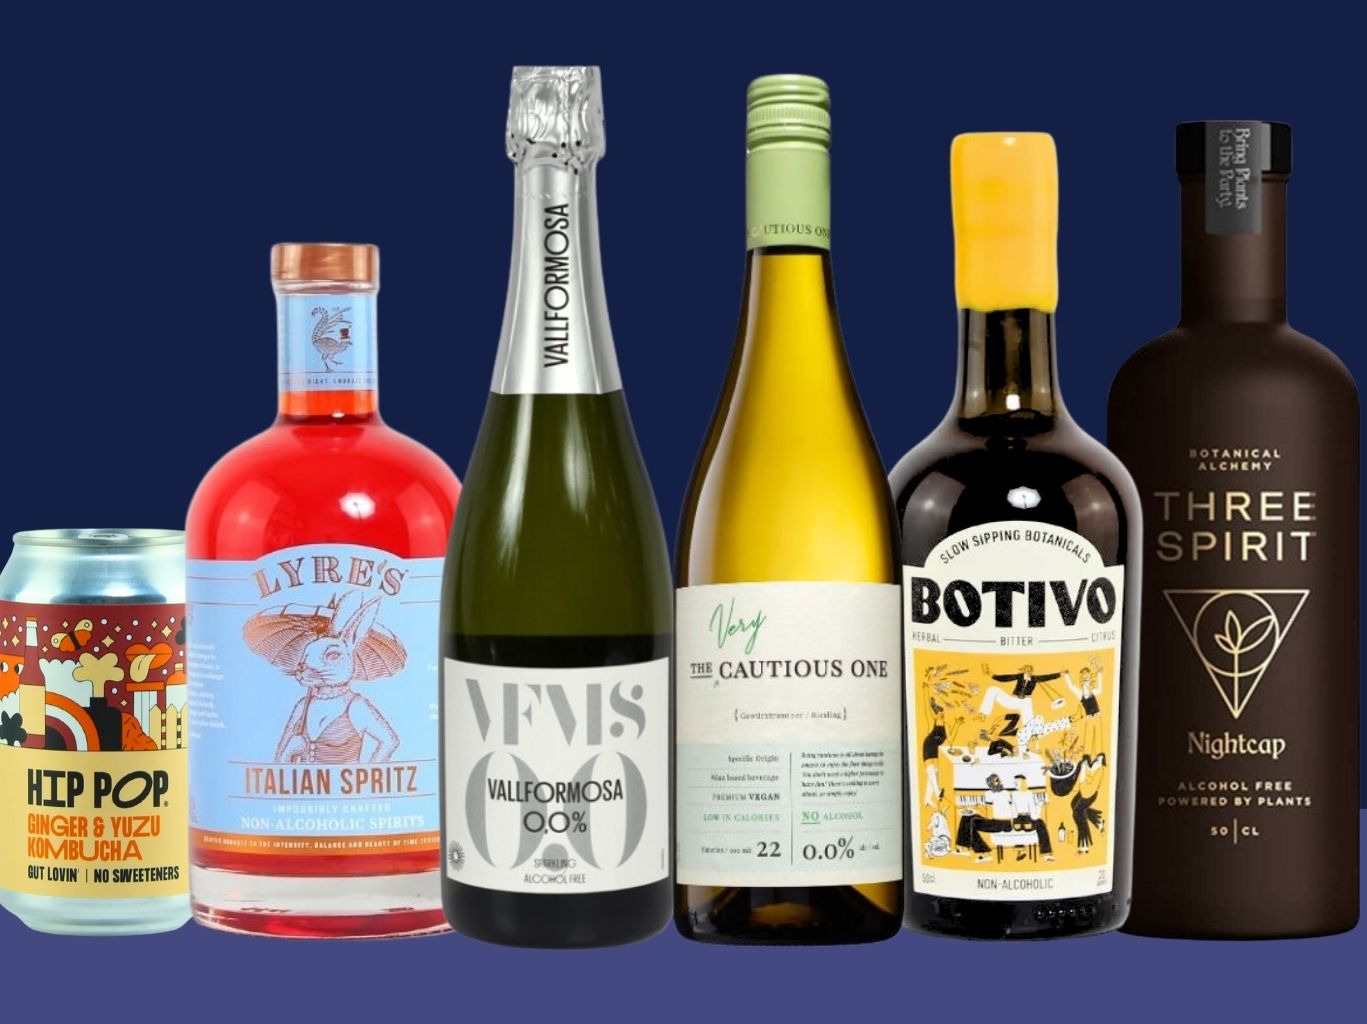 Finding the right Alcohol Free alternatives for you